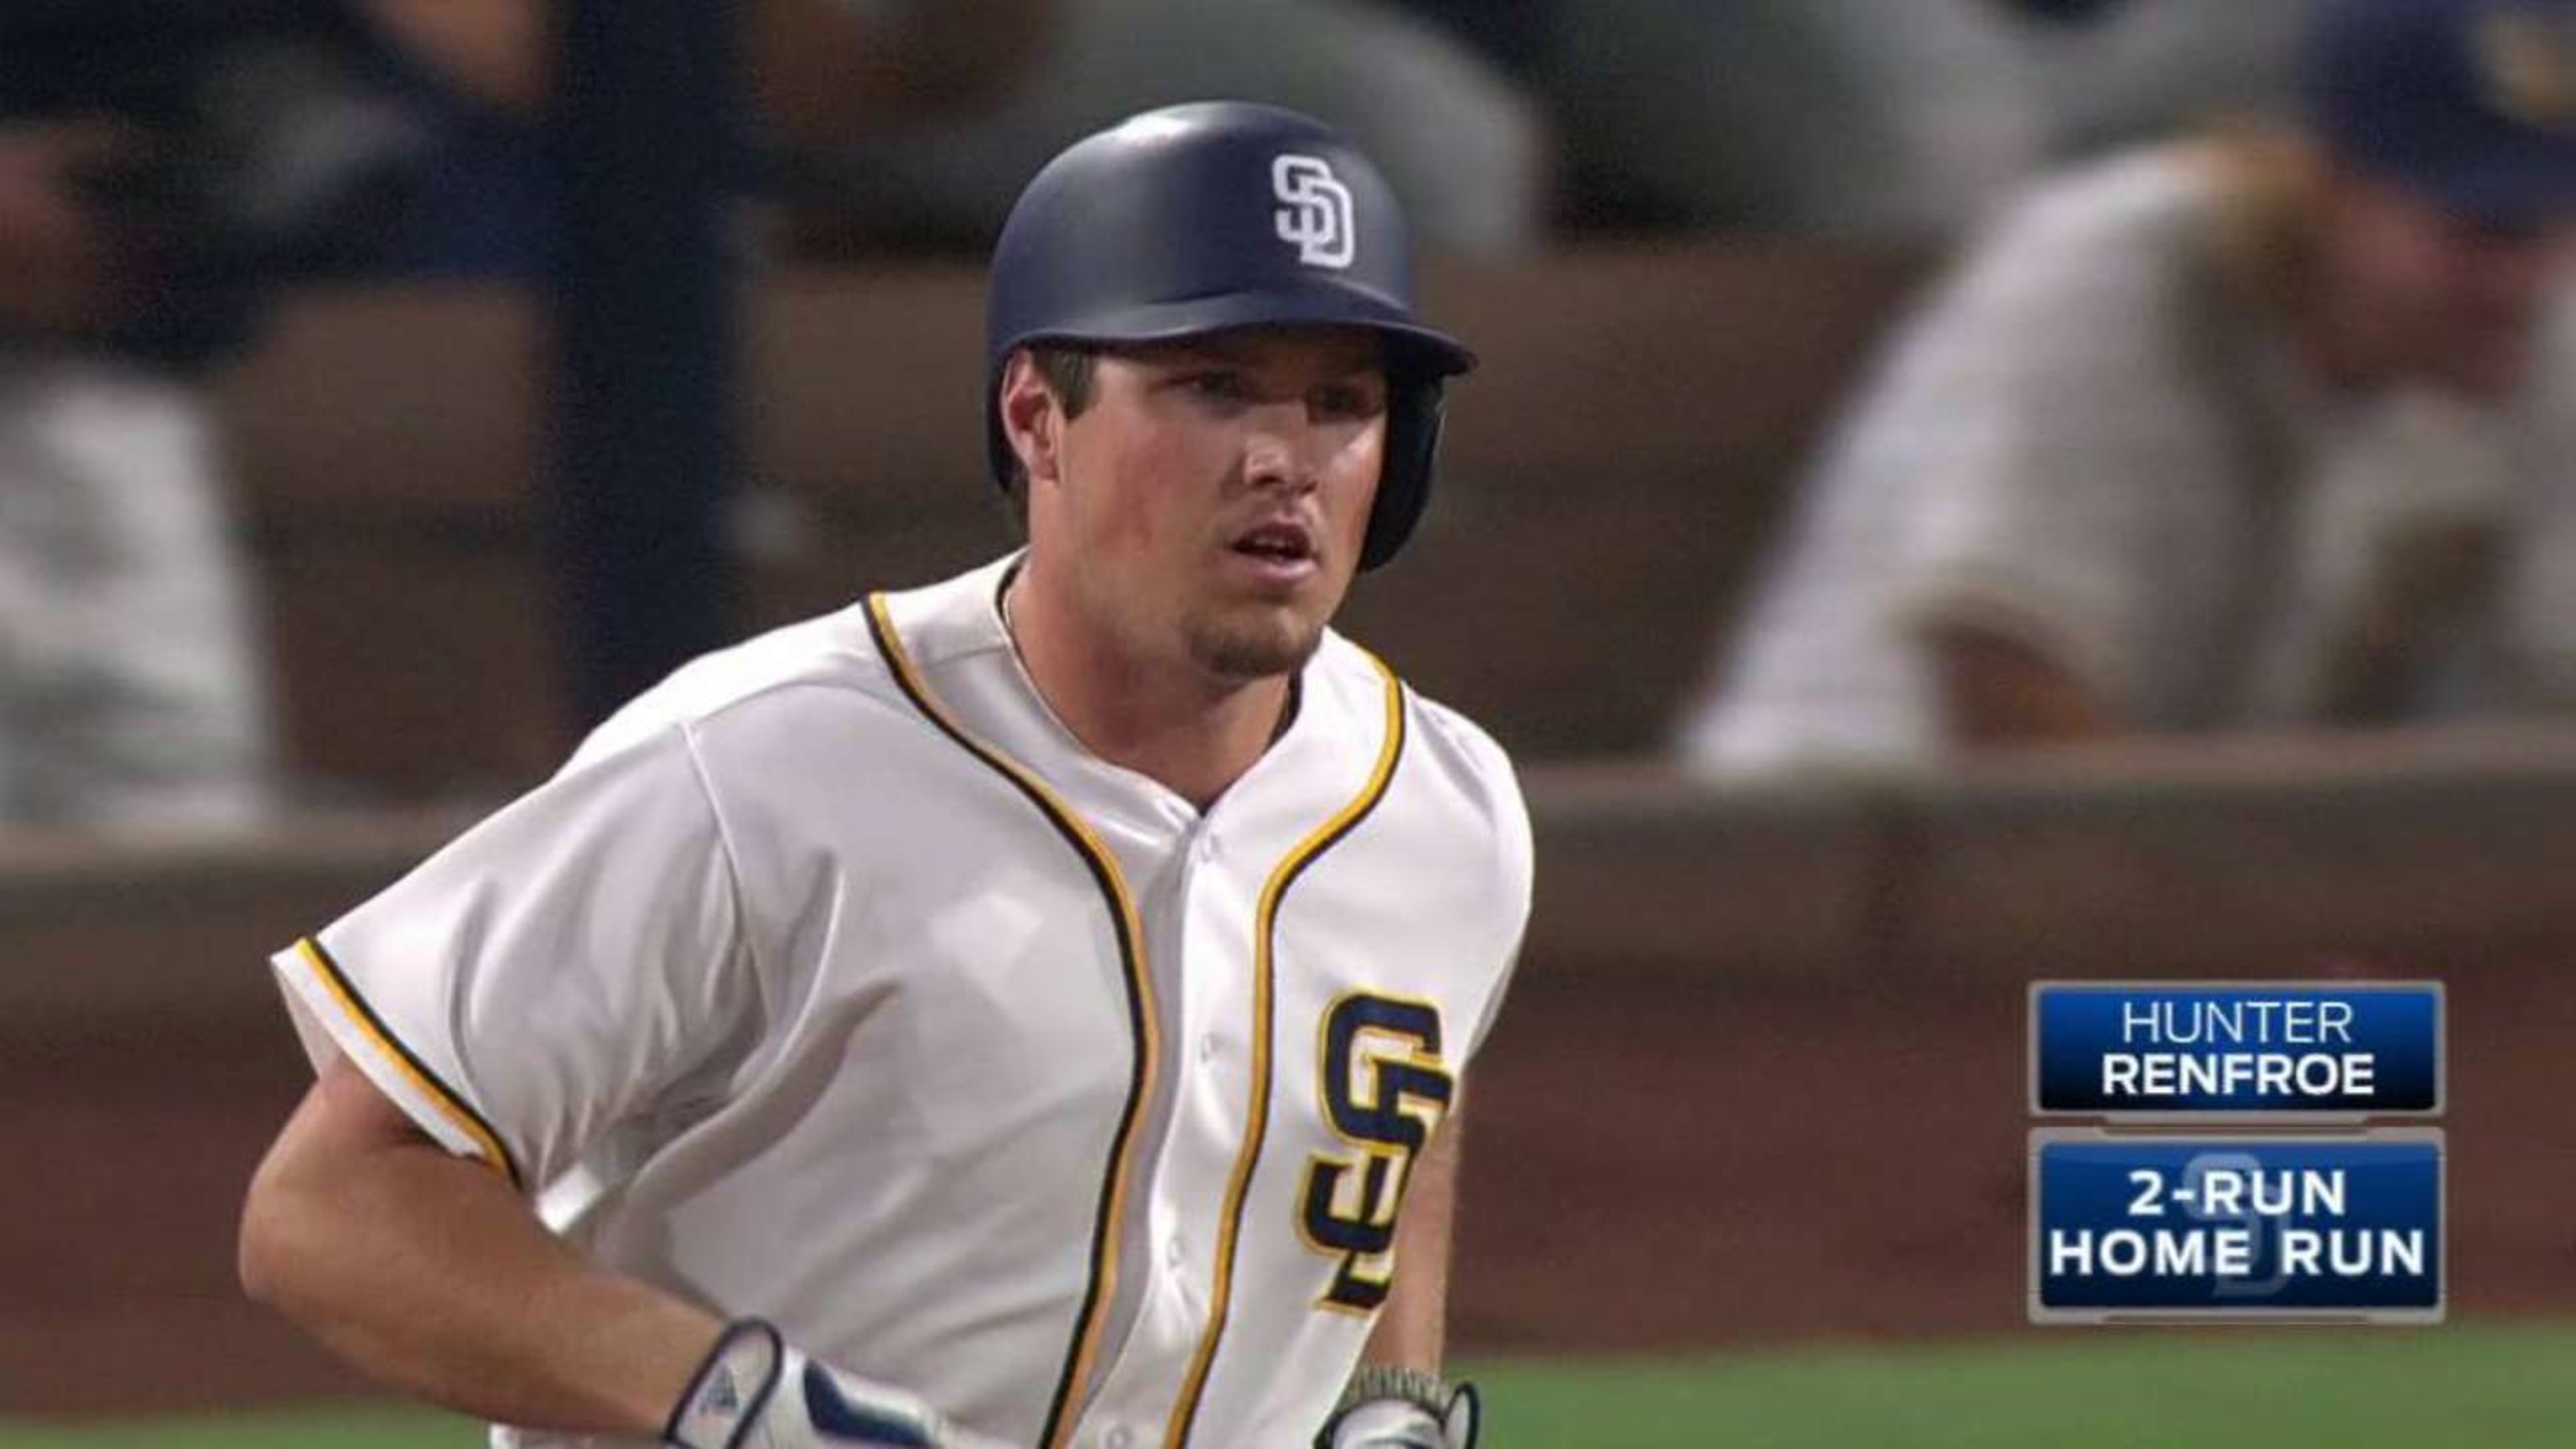 Hunter Renfroe's journey to the Red Sox